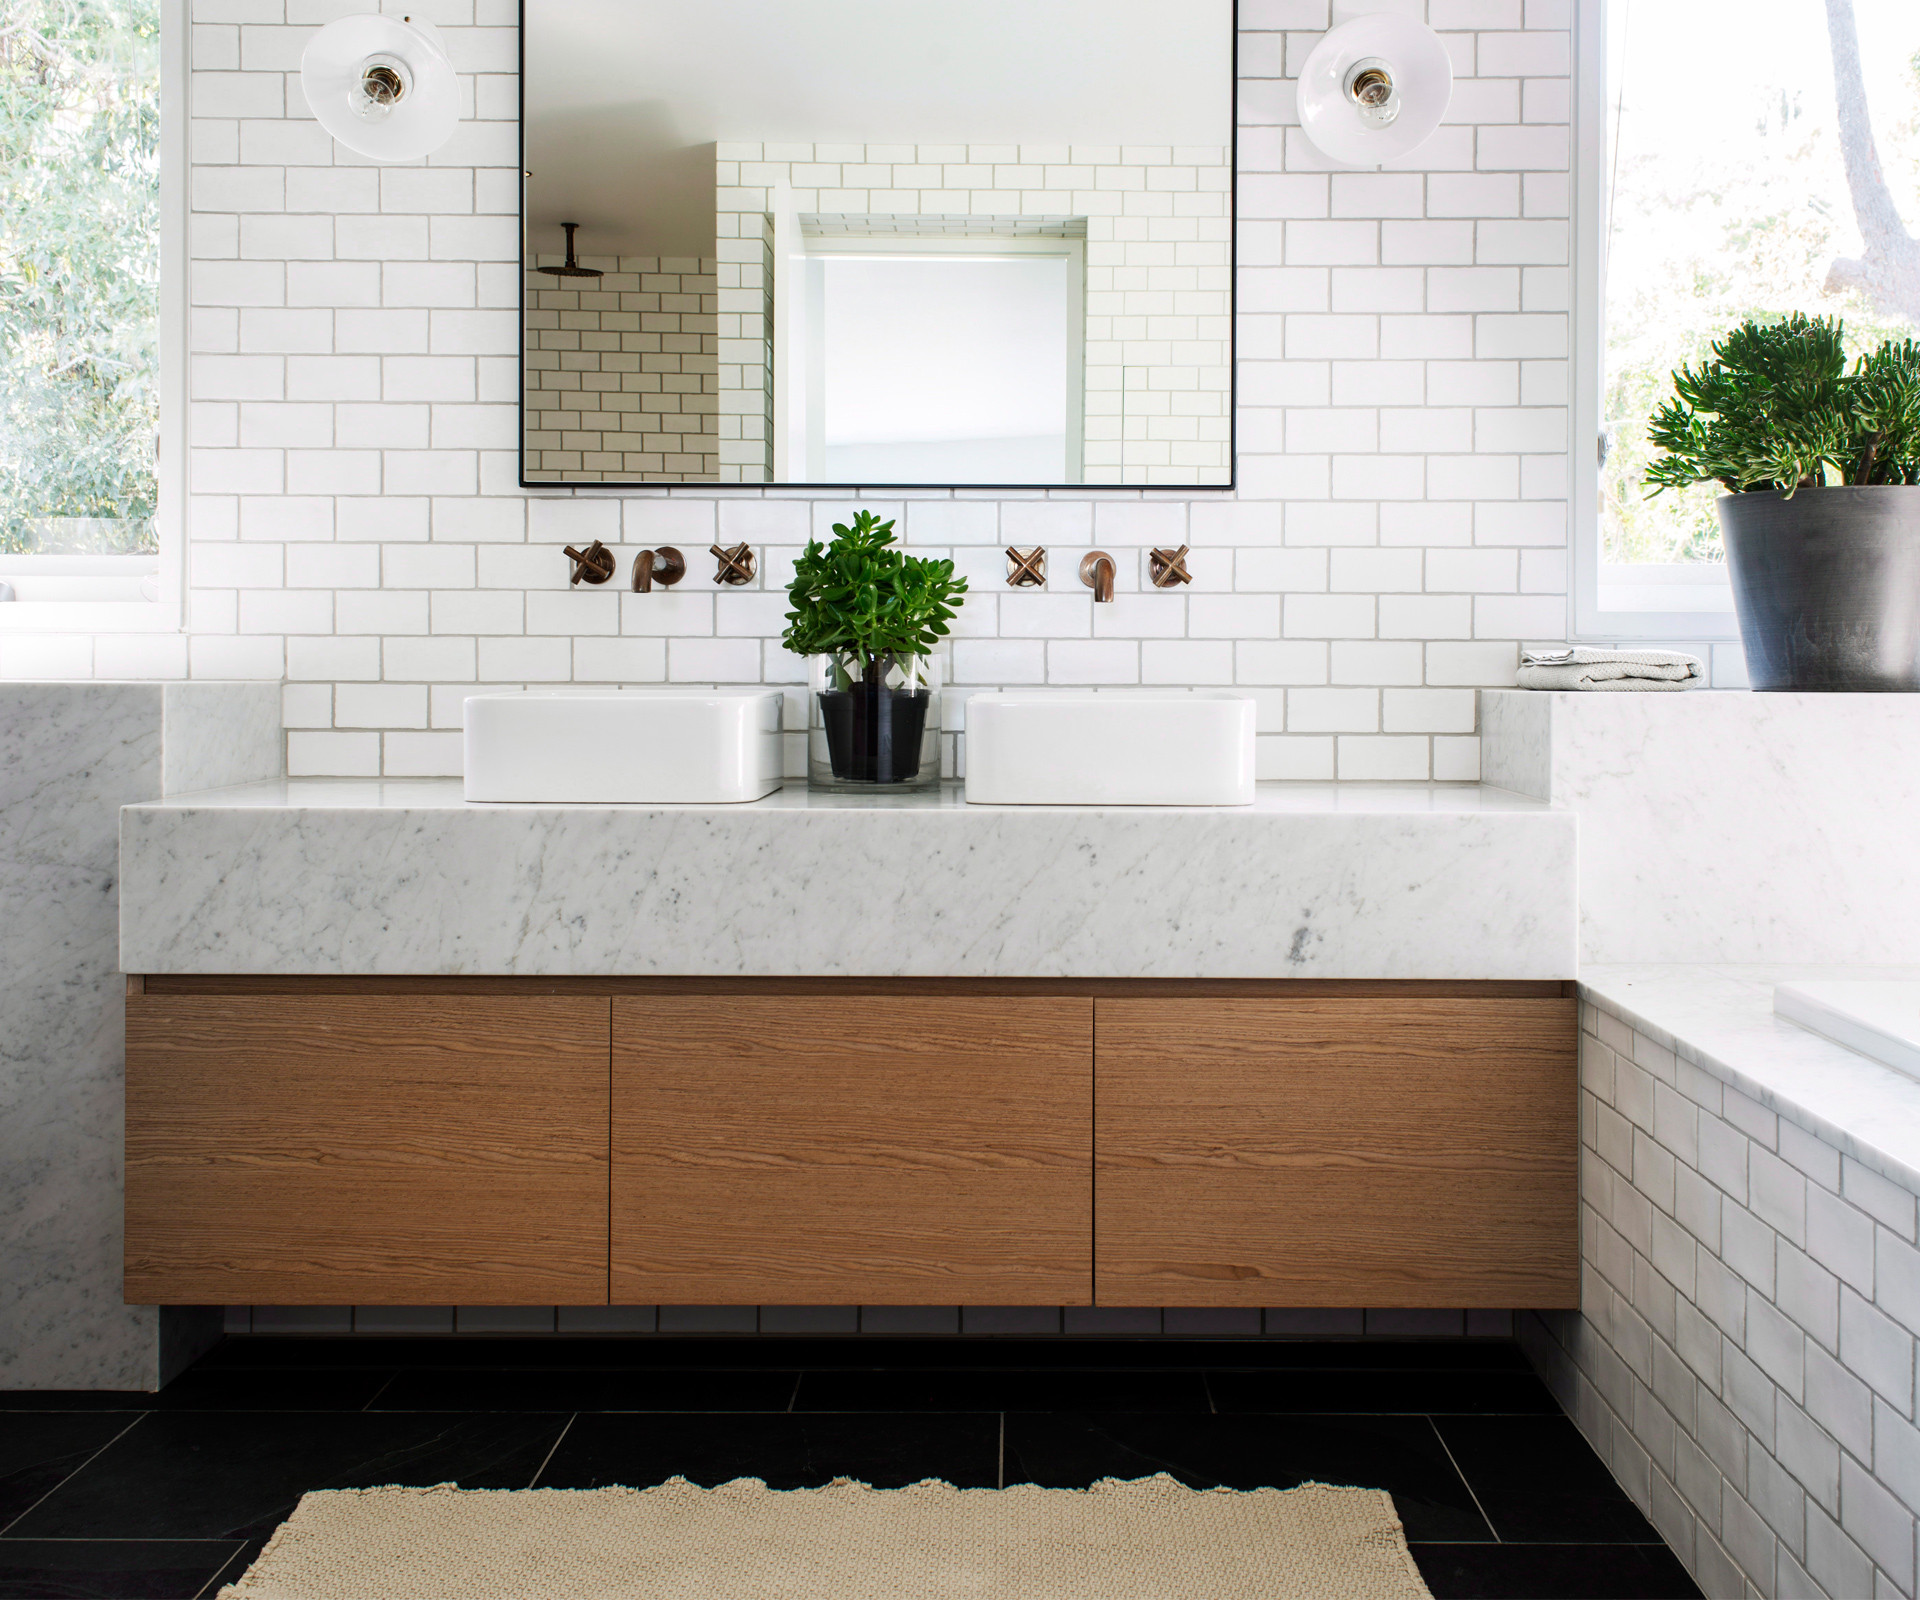 Lowe'S Bathroom Tile
 What to consider before tiling your bathroom